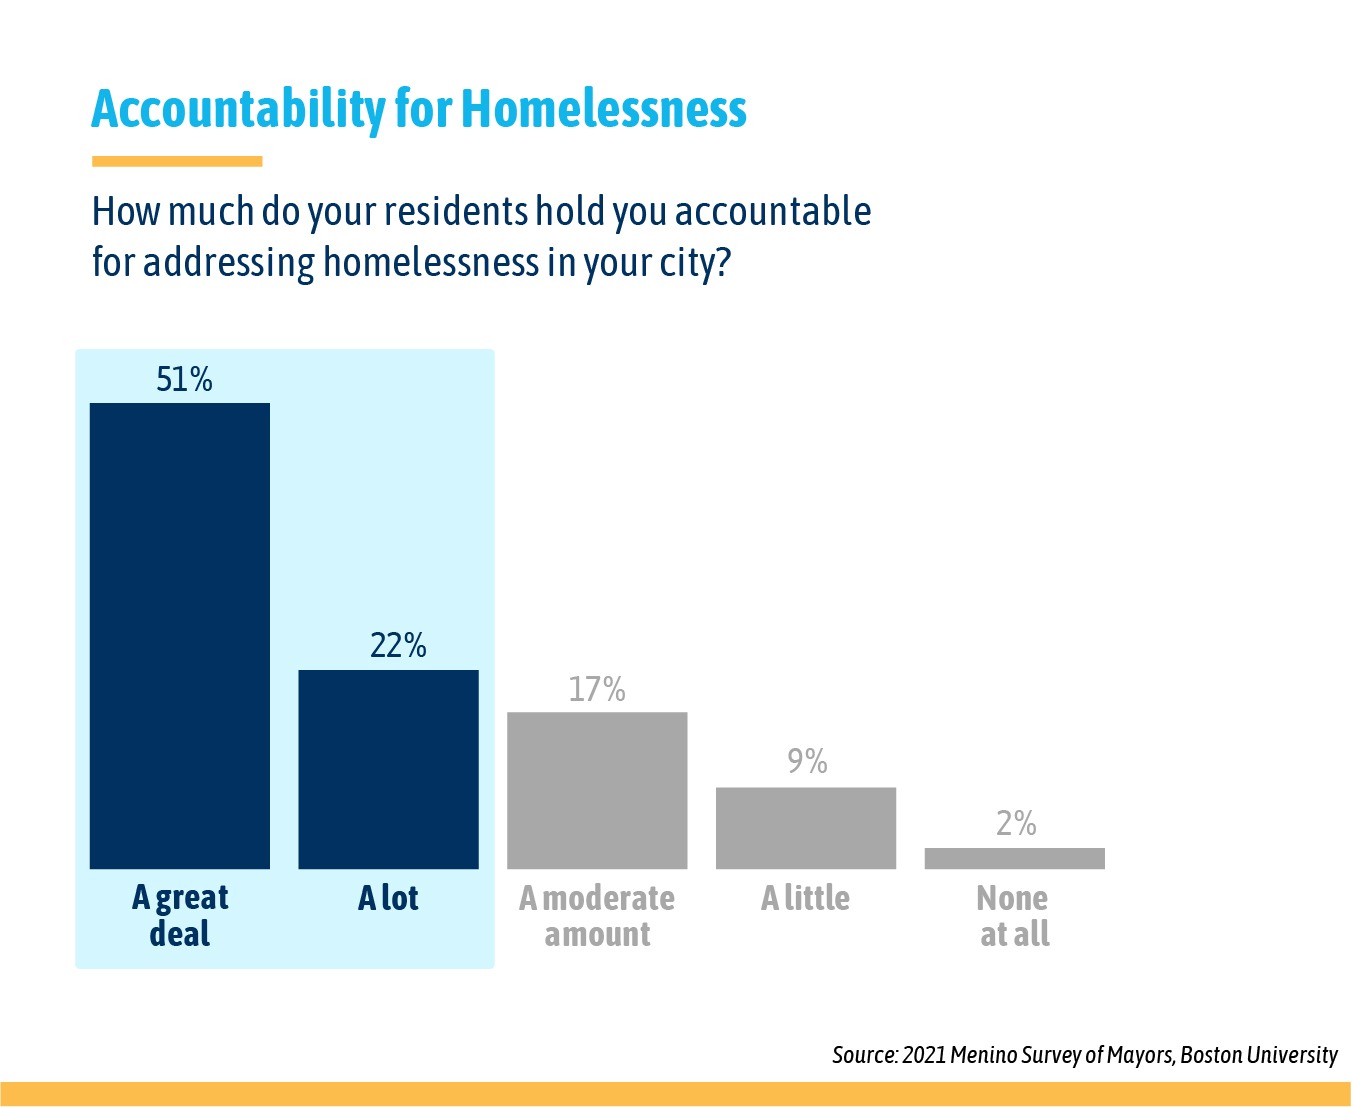 An overwhelming majority of mayors (73%) perceive themselves as being held highly accountable for addressing homelessness in their communities.